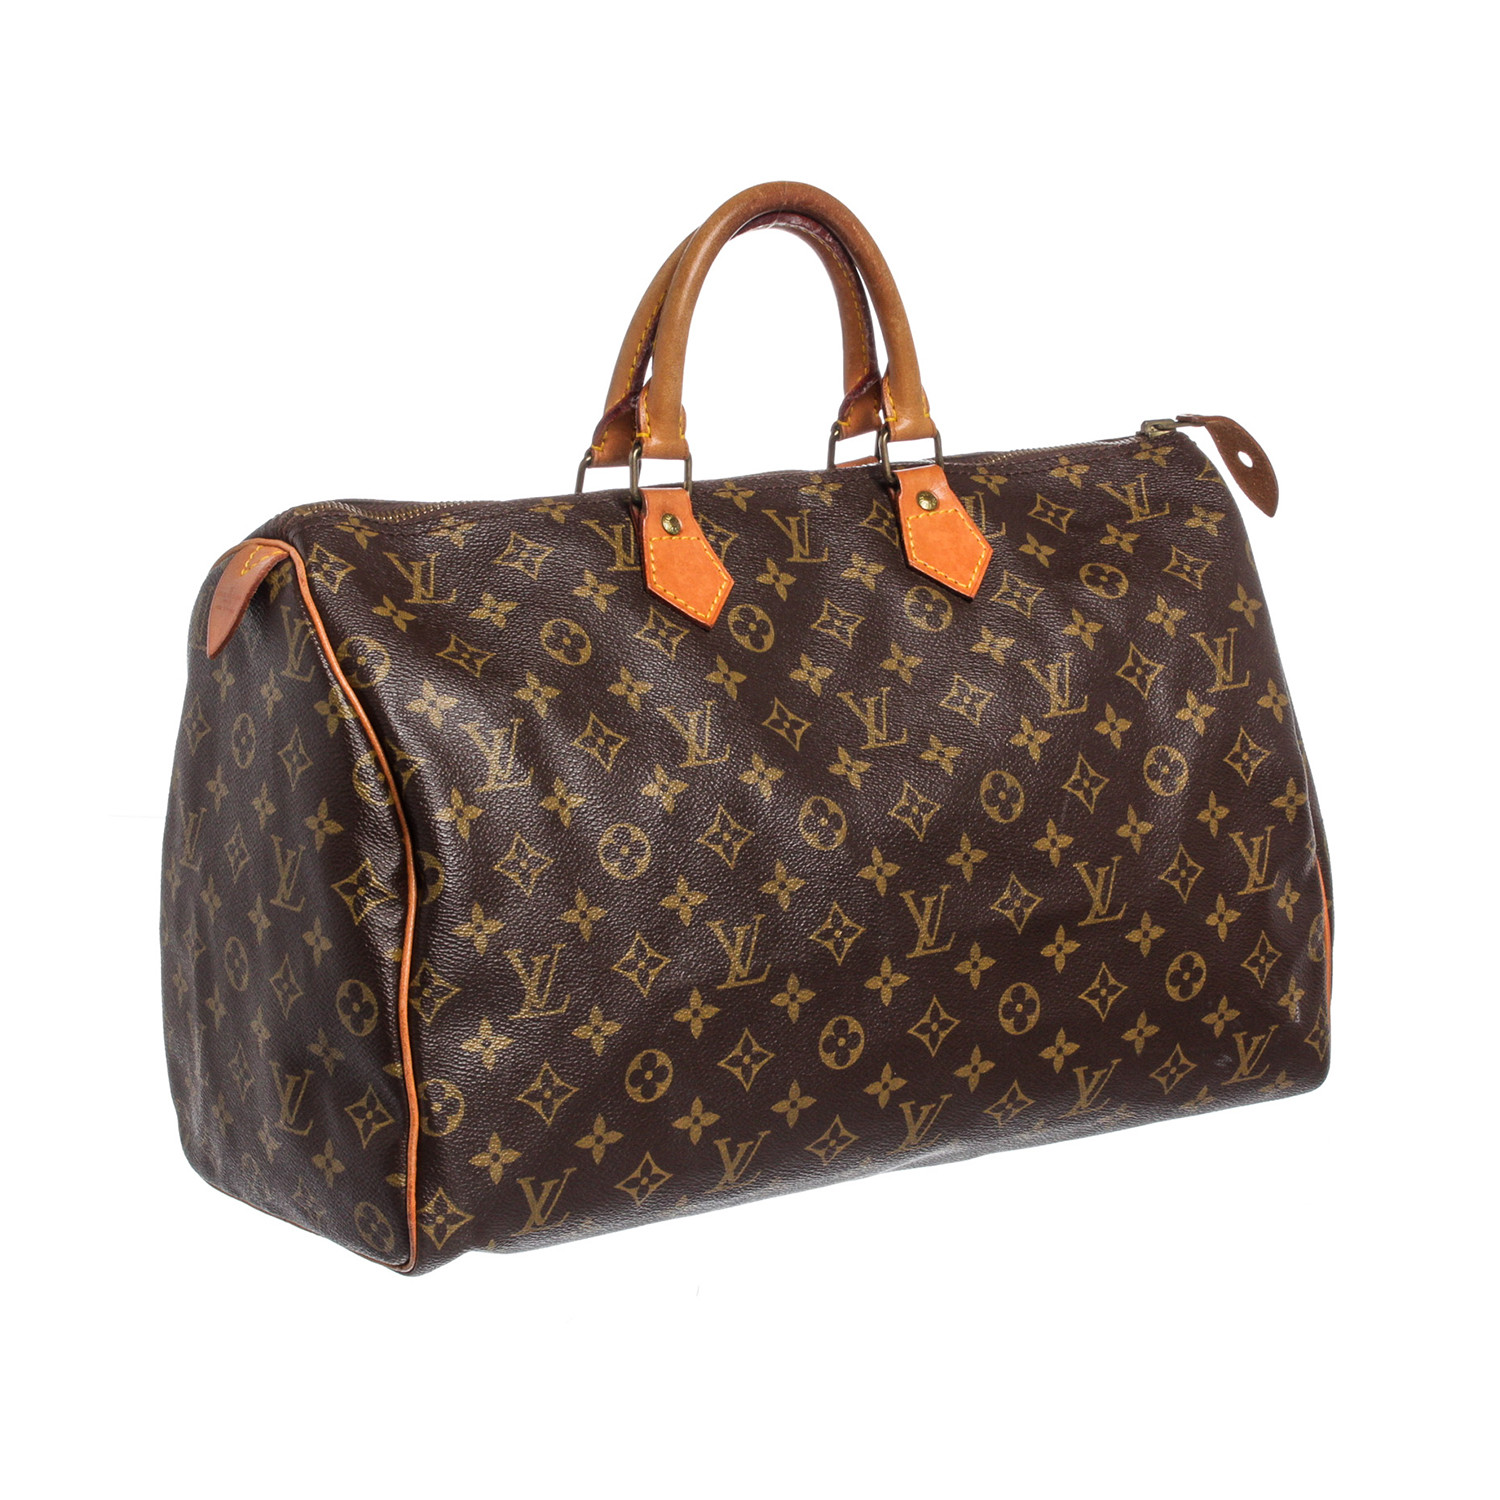 Louis Vuitton // Monogram Canvas Leather Speedy 40 cm Bag // 841SA // Pre-Owned - Pre-Owned ...